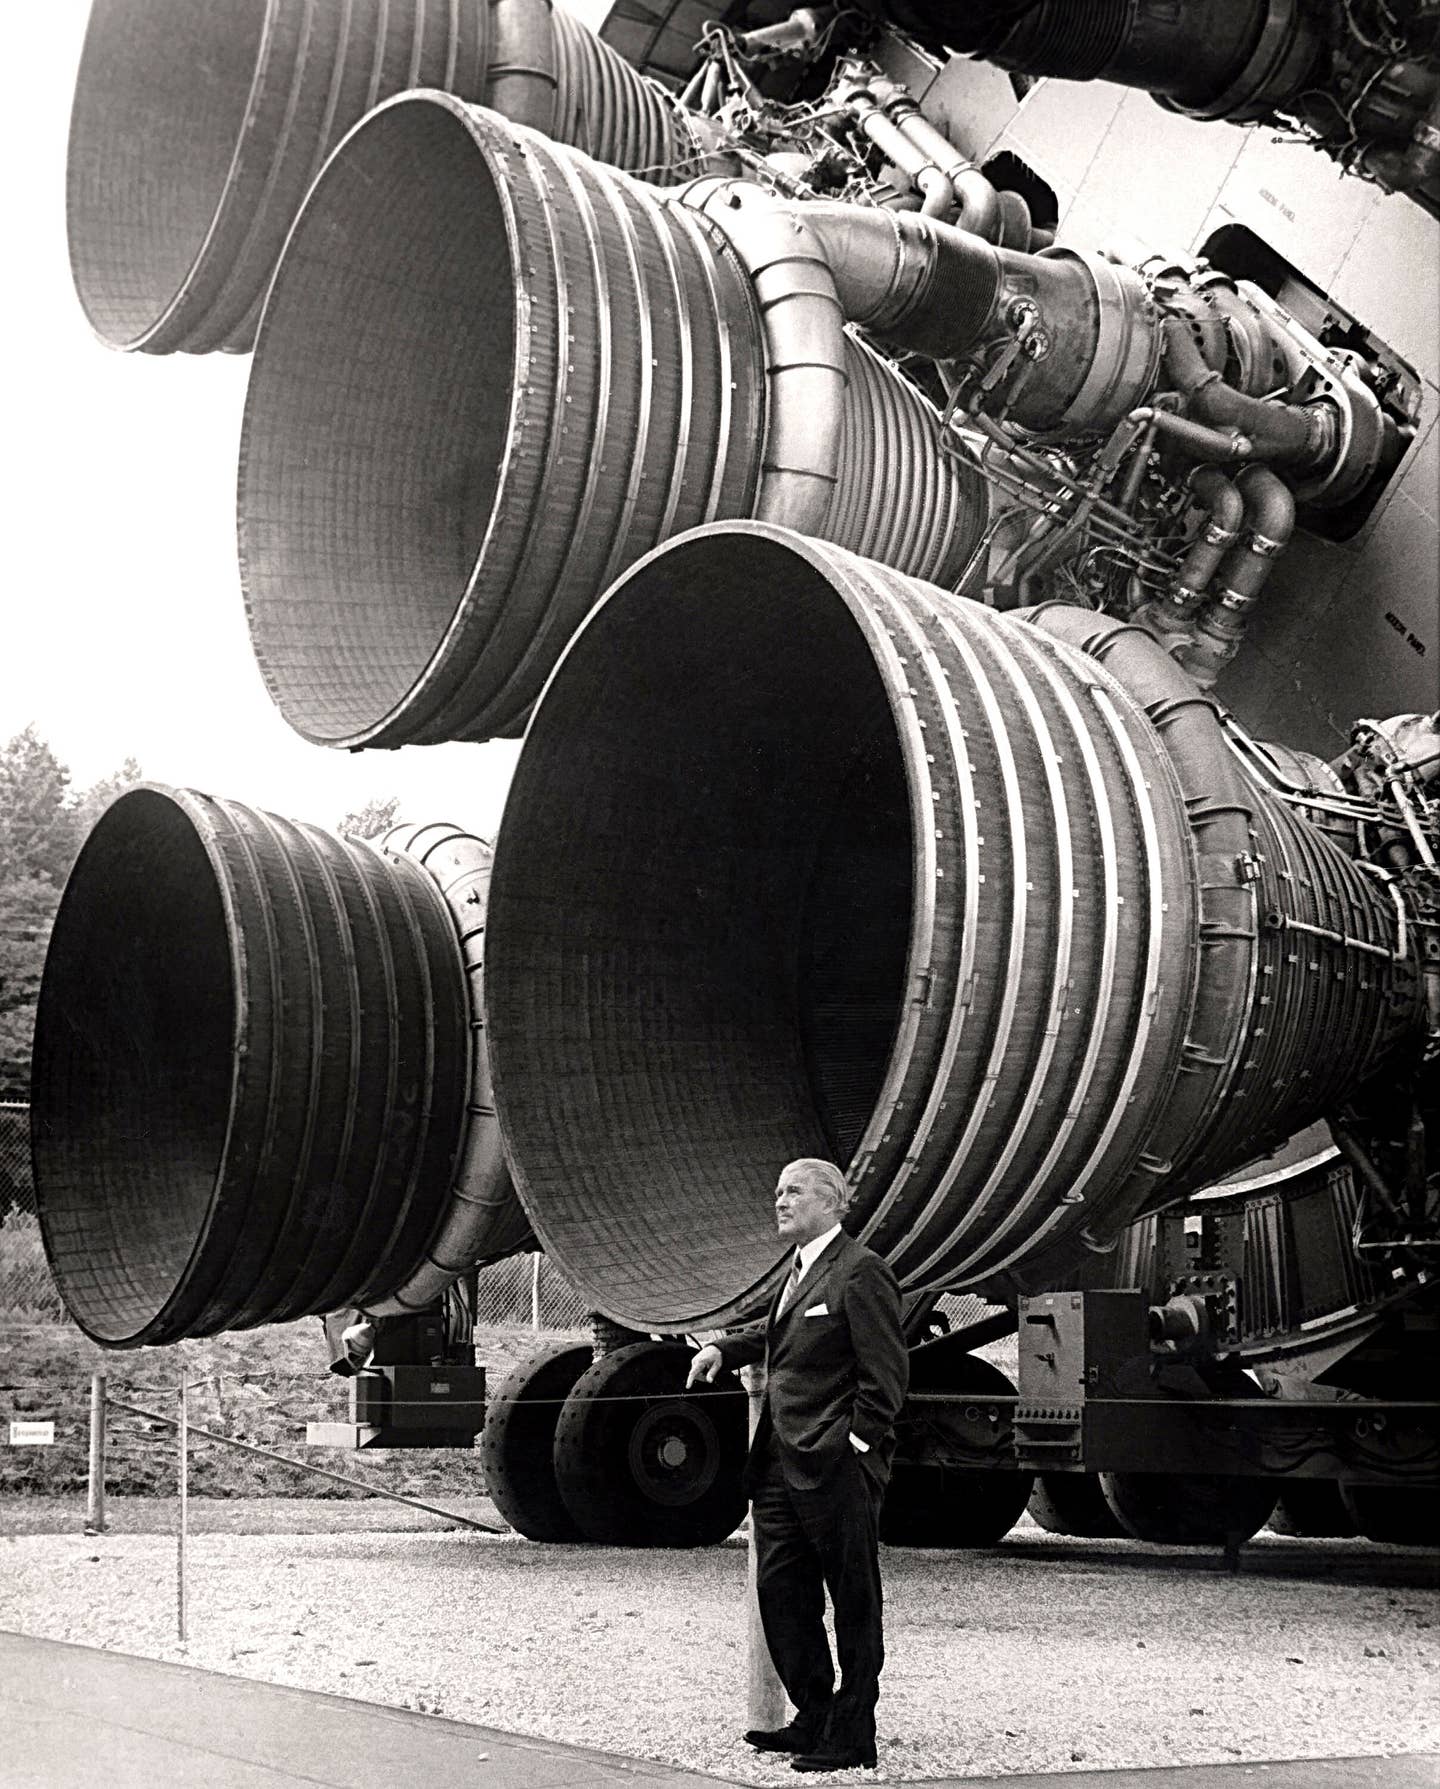 Like this, but with fewer spectators and tires. And more rockets. (NASA)